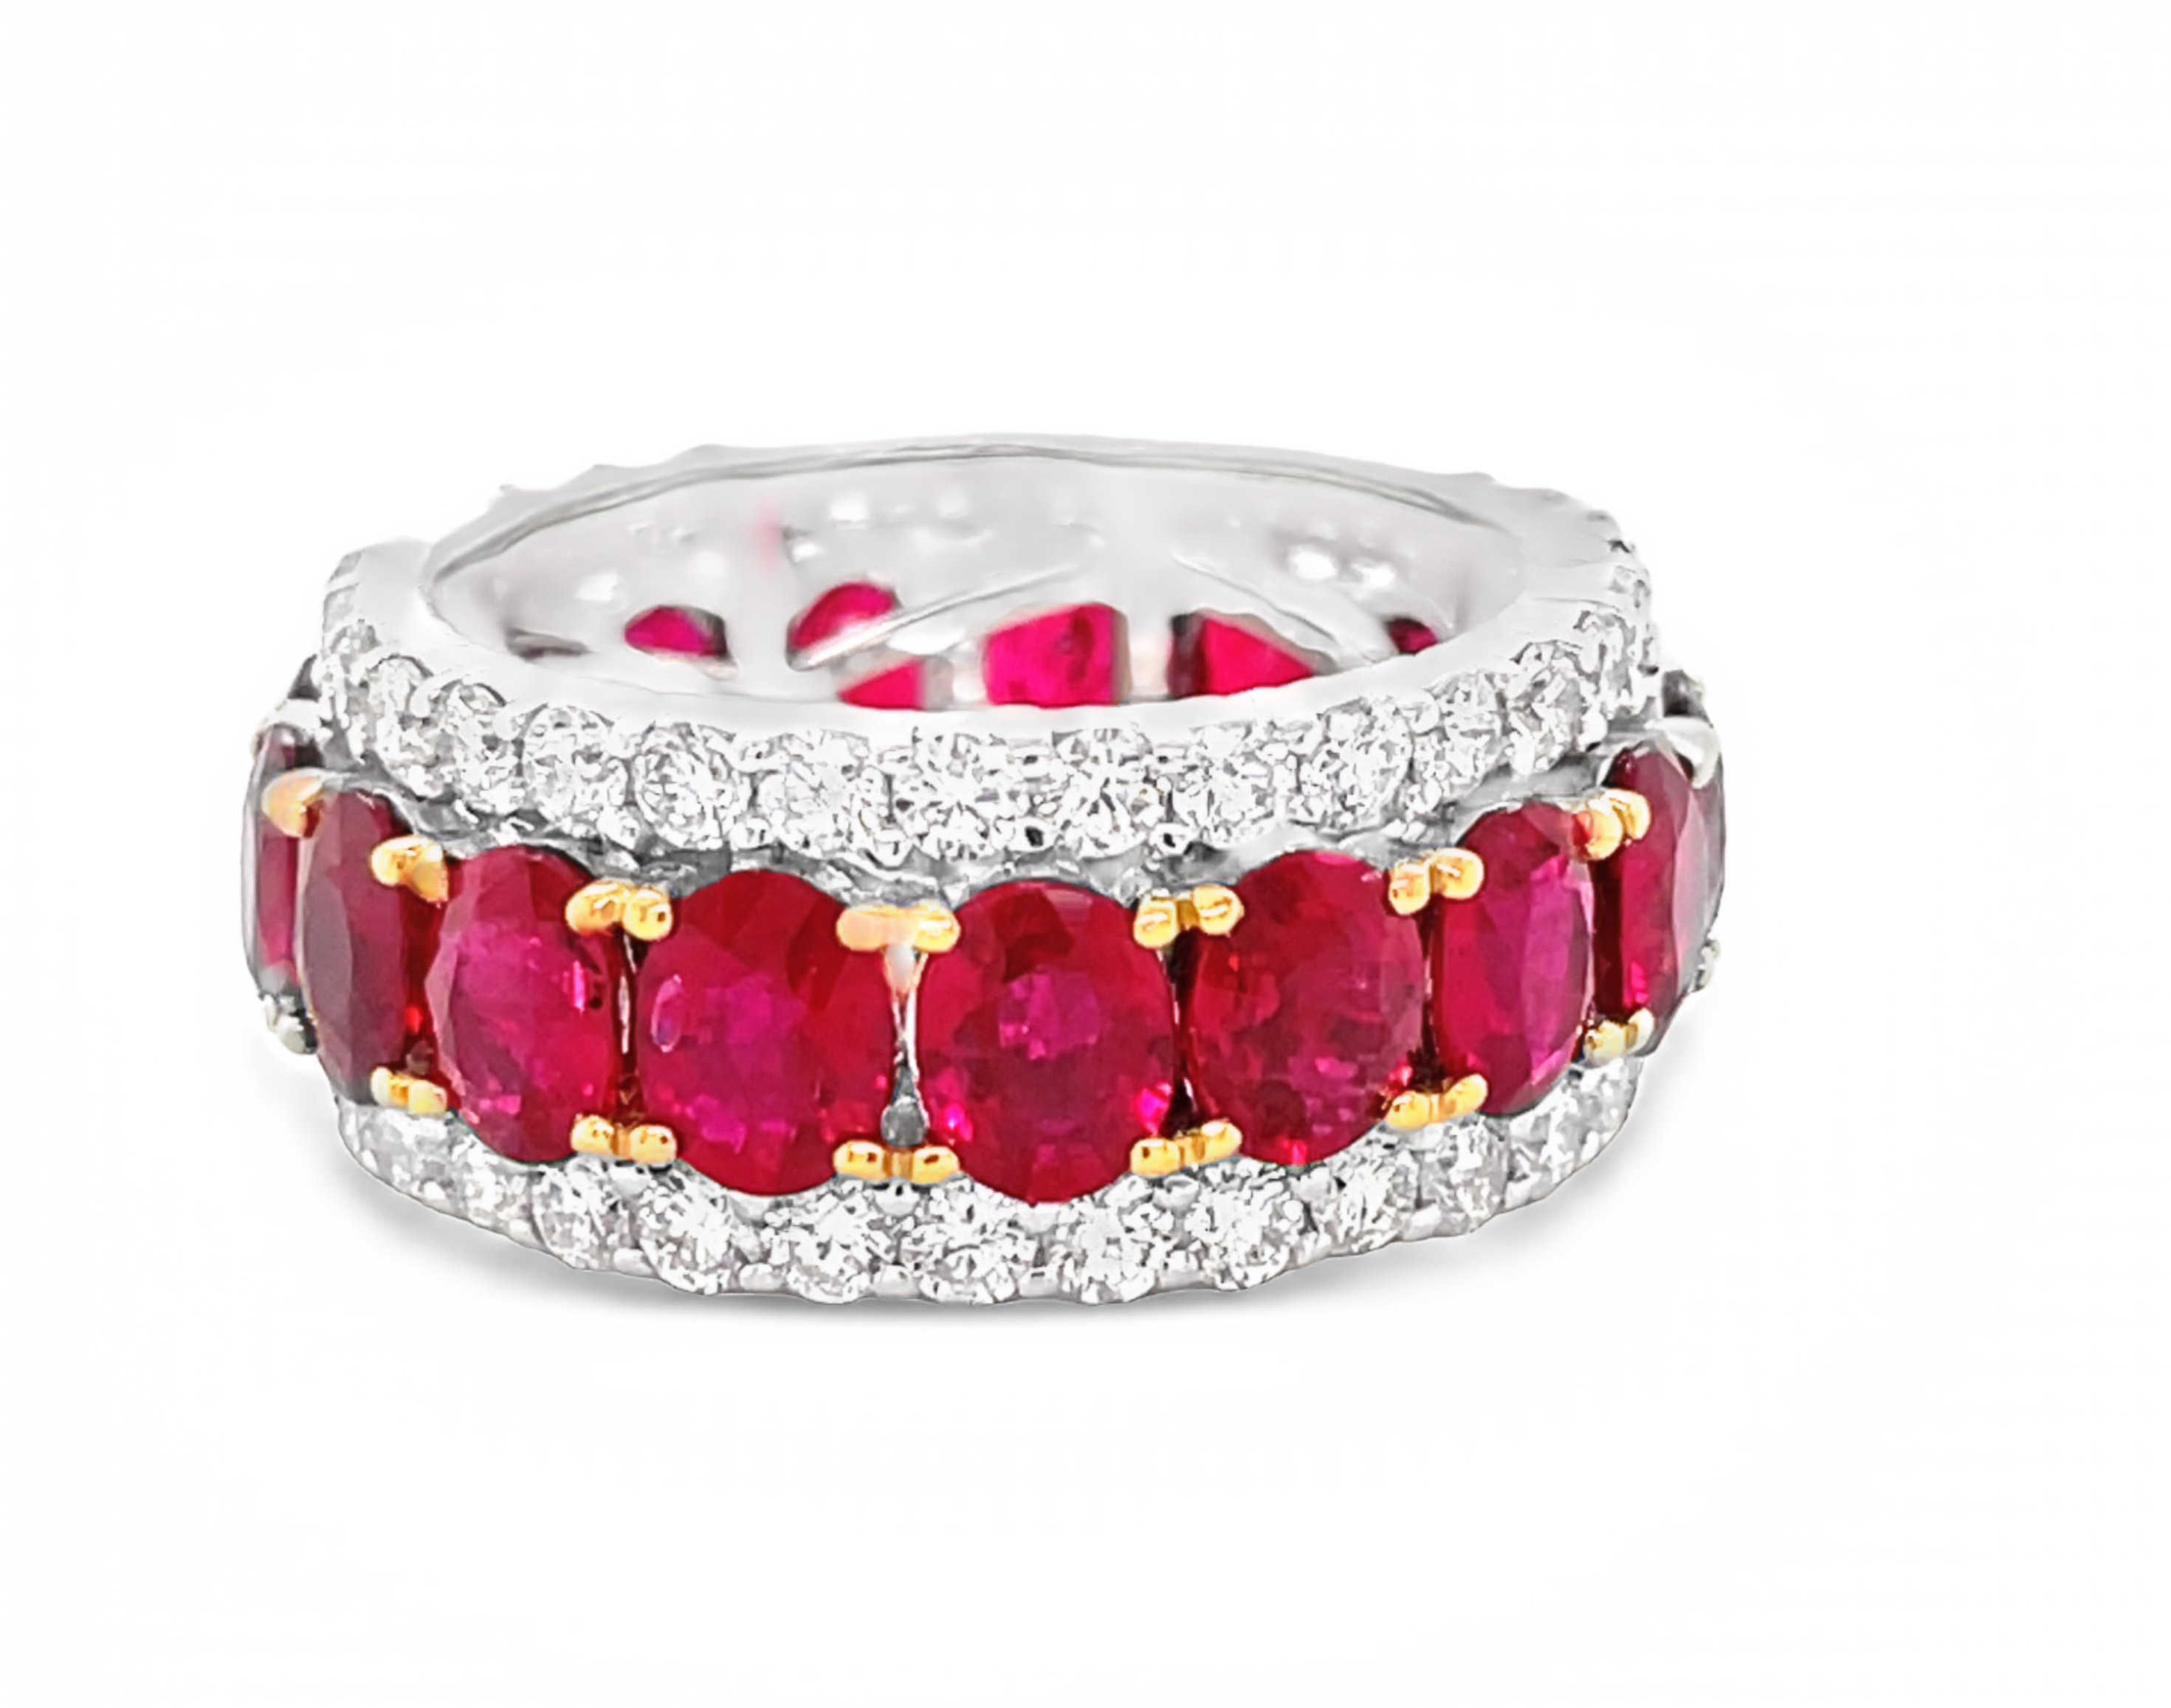 18k white & yellow gold ring  Oval shape Rubies 6.11 cts  Round diamonds 1.89 cts.  Eternity band   9.00 mm.  Size 6